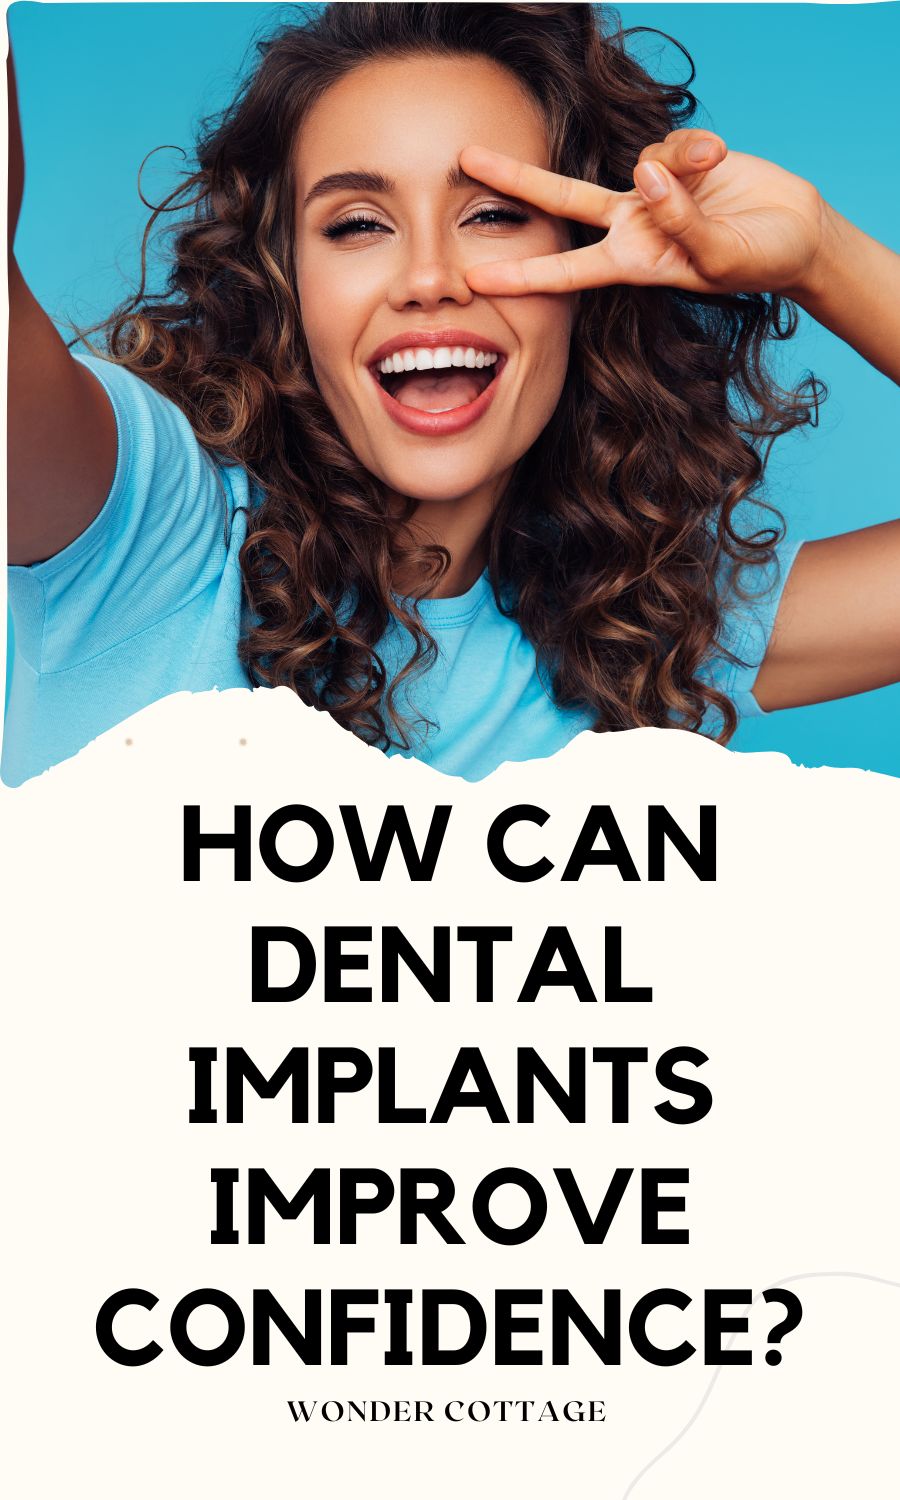 How Can Dental Implants Improve Confidence?